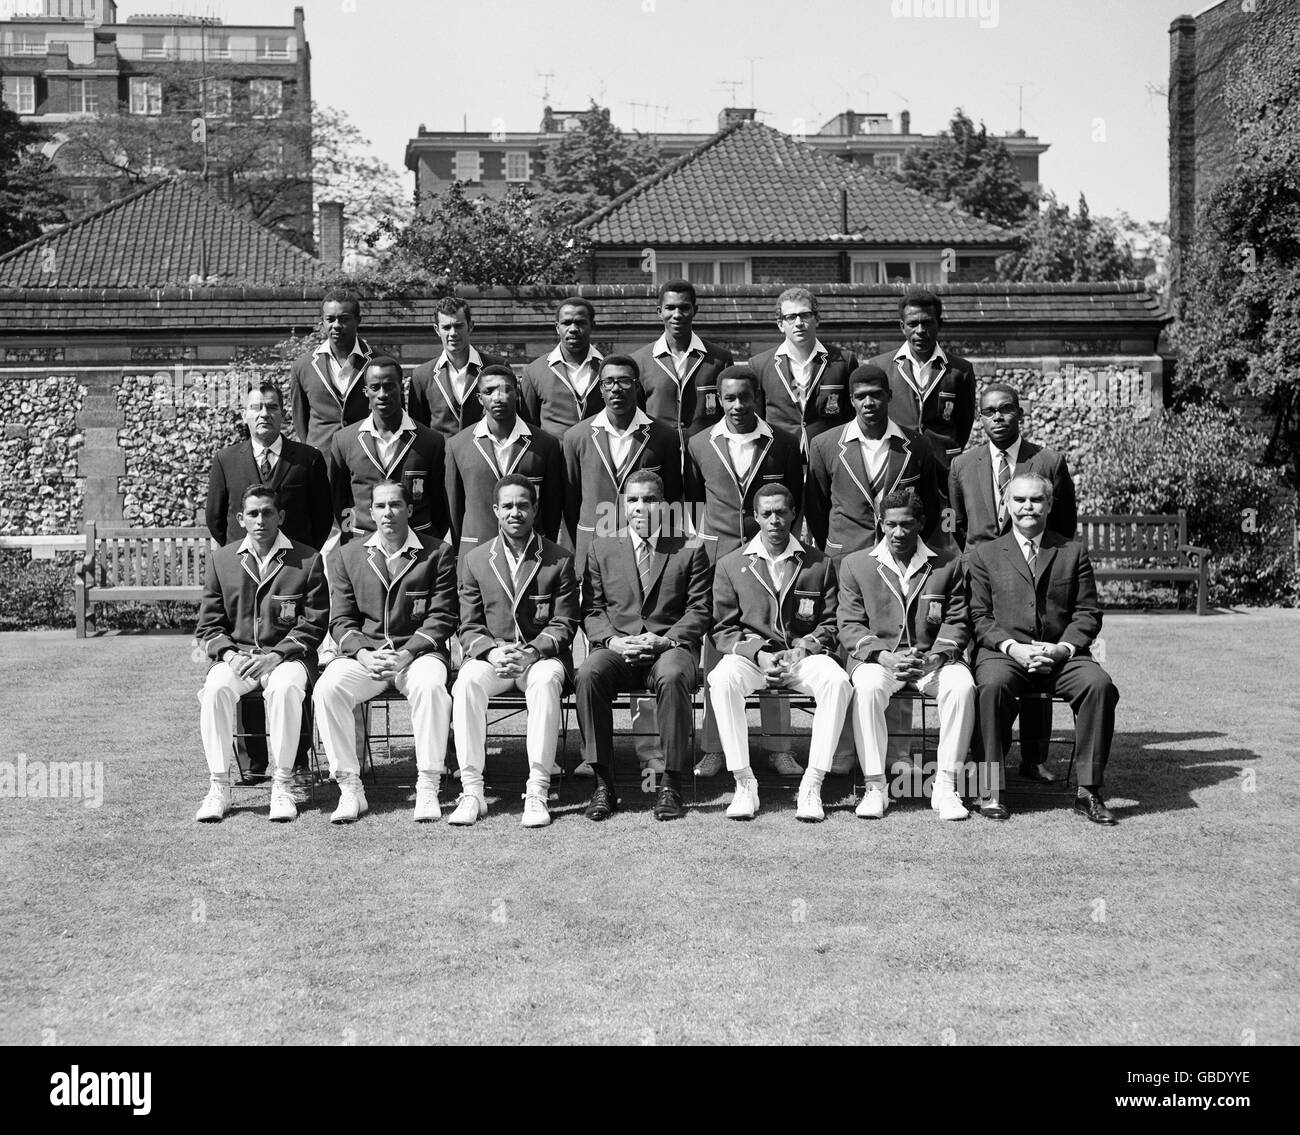 West Indies Team Group. Back row, from L to R: Maurice Foster, Charlie Davis, John Shepherd, Mike Findlay, Steve Camacho, Roy Fredericks. Centre Row, L to R: M Hoyes (Physiotherapist - unknown first name), Vanburn Holder, Pascal Roberts, Clive Lloyd, Grayson Shillingford, Philibert Blair, N Walker (Asst manager - unknown first name). Front Row, L to R: Joey Carew, Jackie Hendriks, Gary Sobers (Captain), Clyde Walcott, Lance Gibbs (Vice Capt), Basil Butcher, P Short (Treasurer - first name unknown) Stock Photo